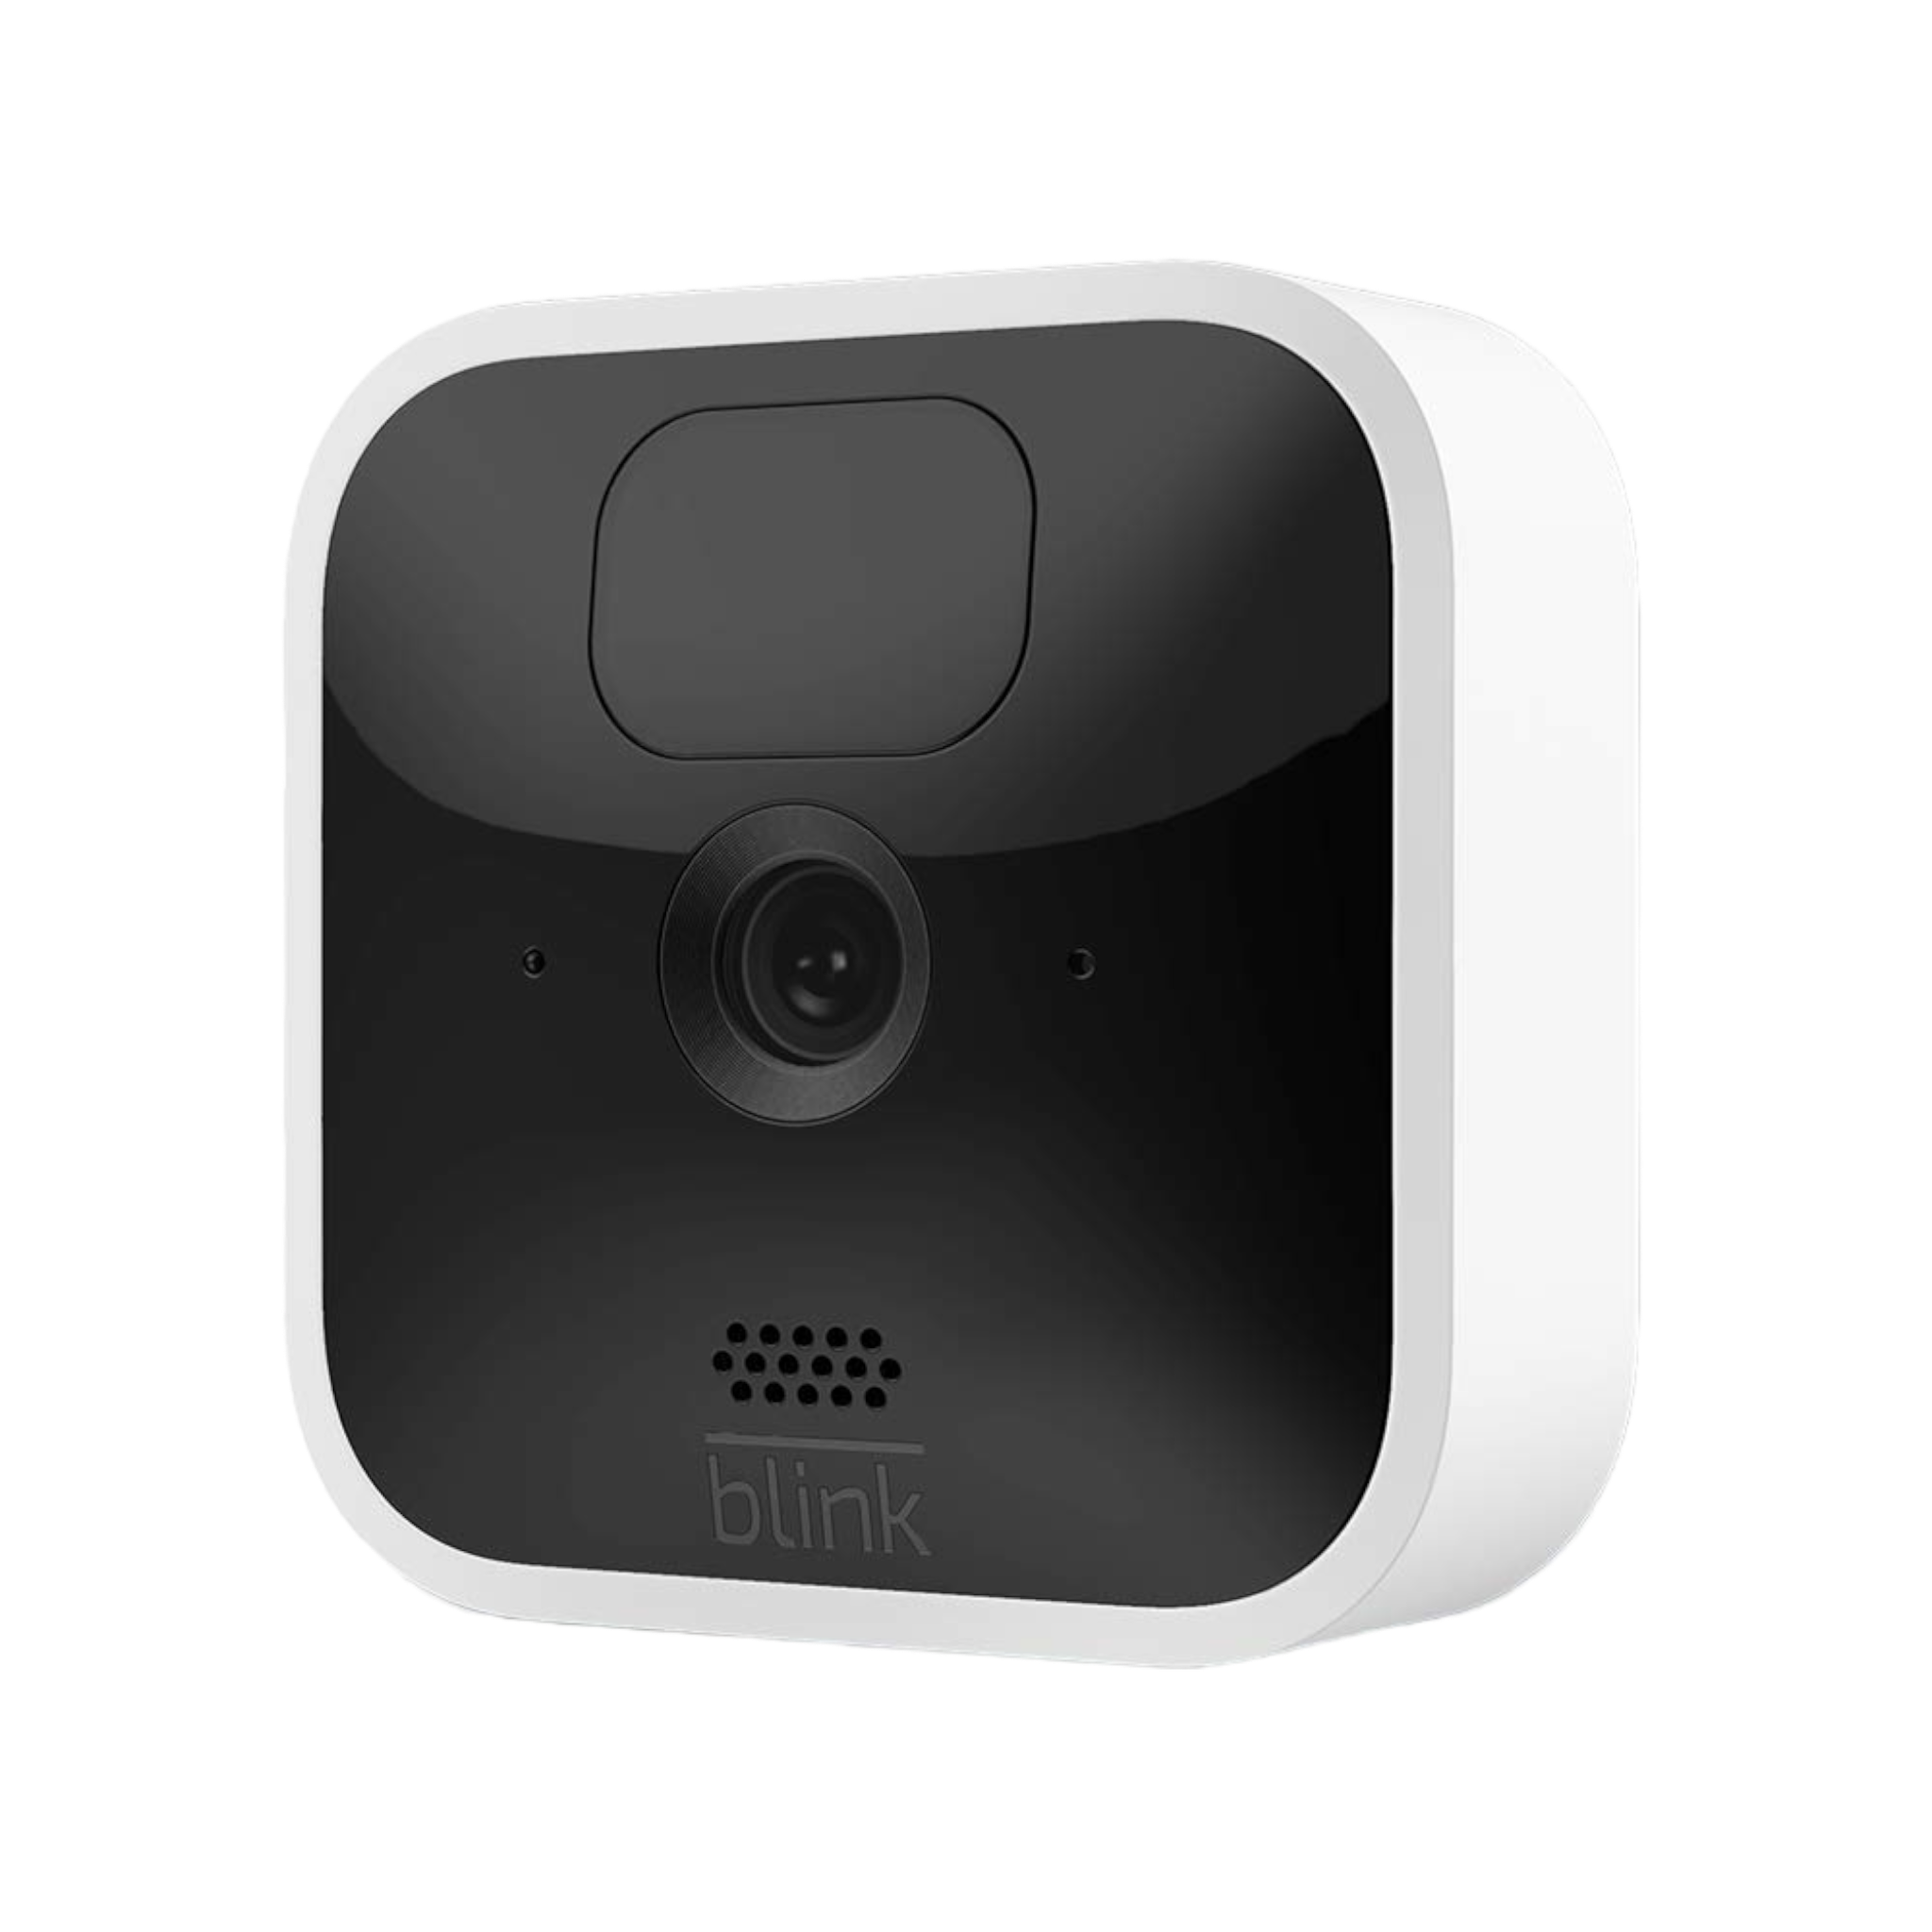 Blink Outdoor - wireless, weather-resistant HD security camera, two-year  battery life, motion detection, set up in minutes - 2 camera kit 